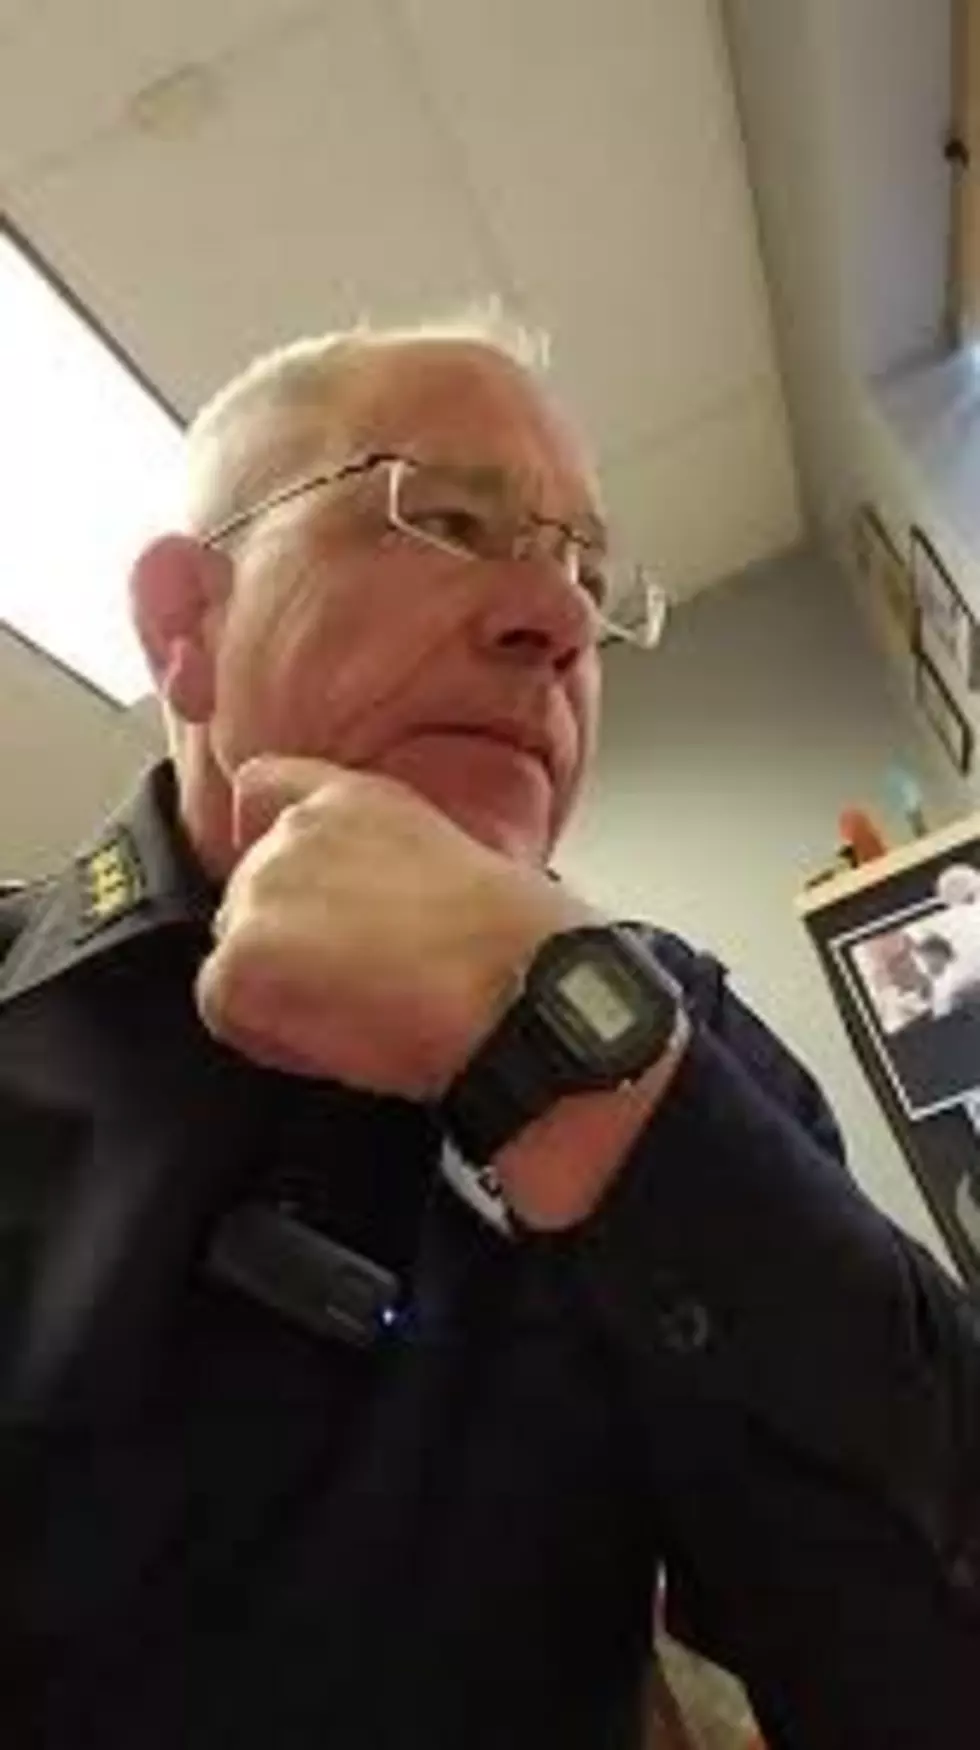 West Richland Police Chief Has "Fun" with Scammers